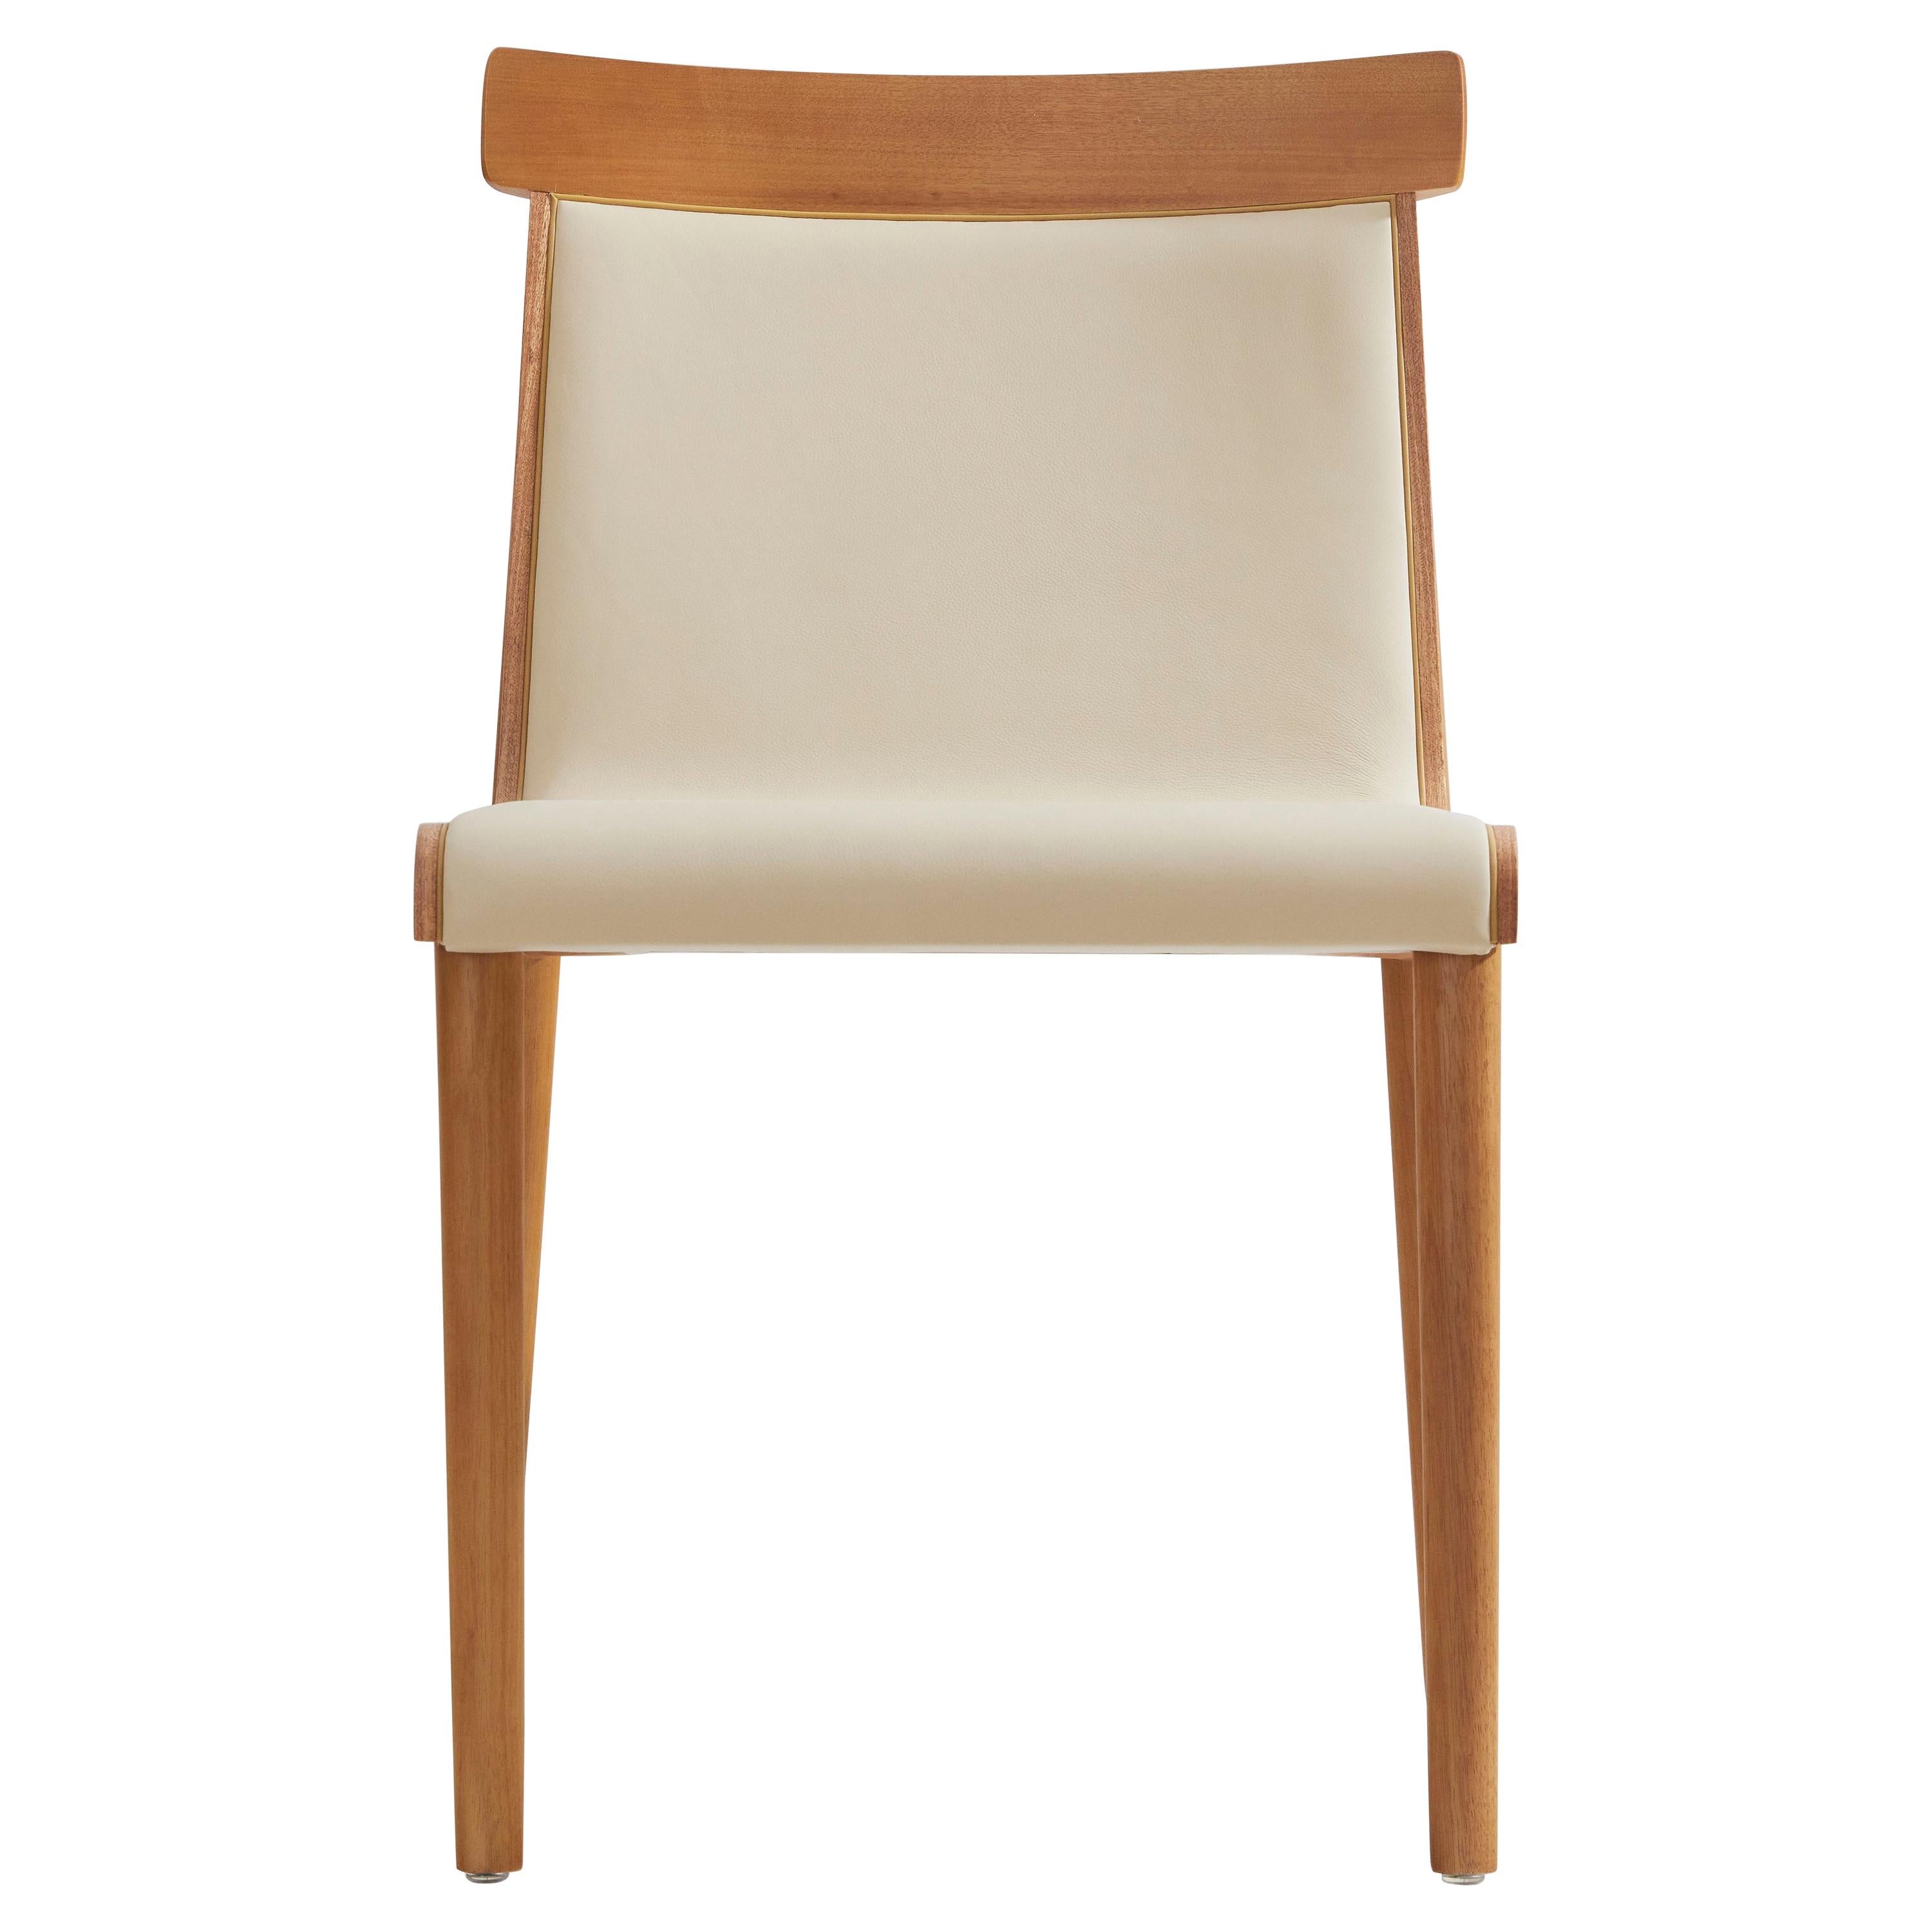 Contemporary Chair in Solid Wood, Upholstered in Leather or Textiles